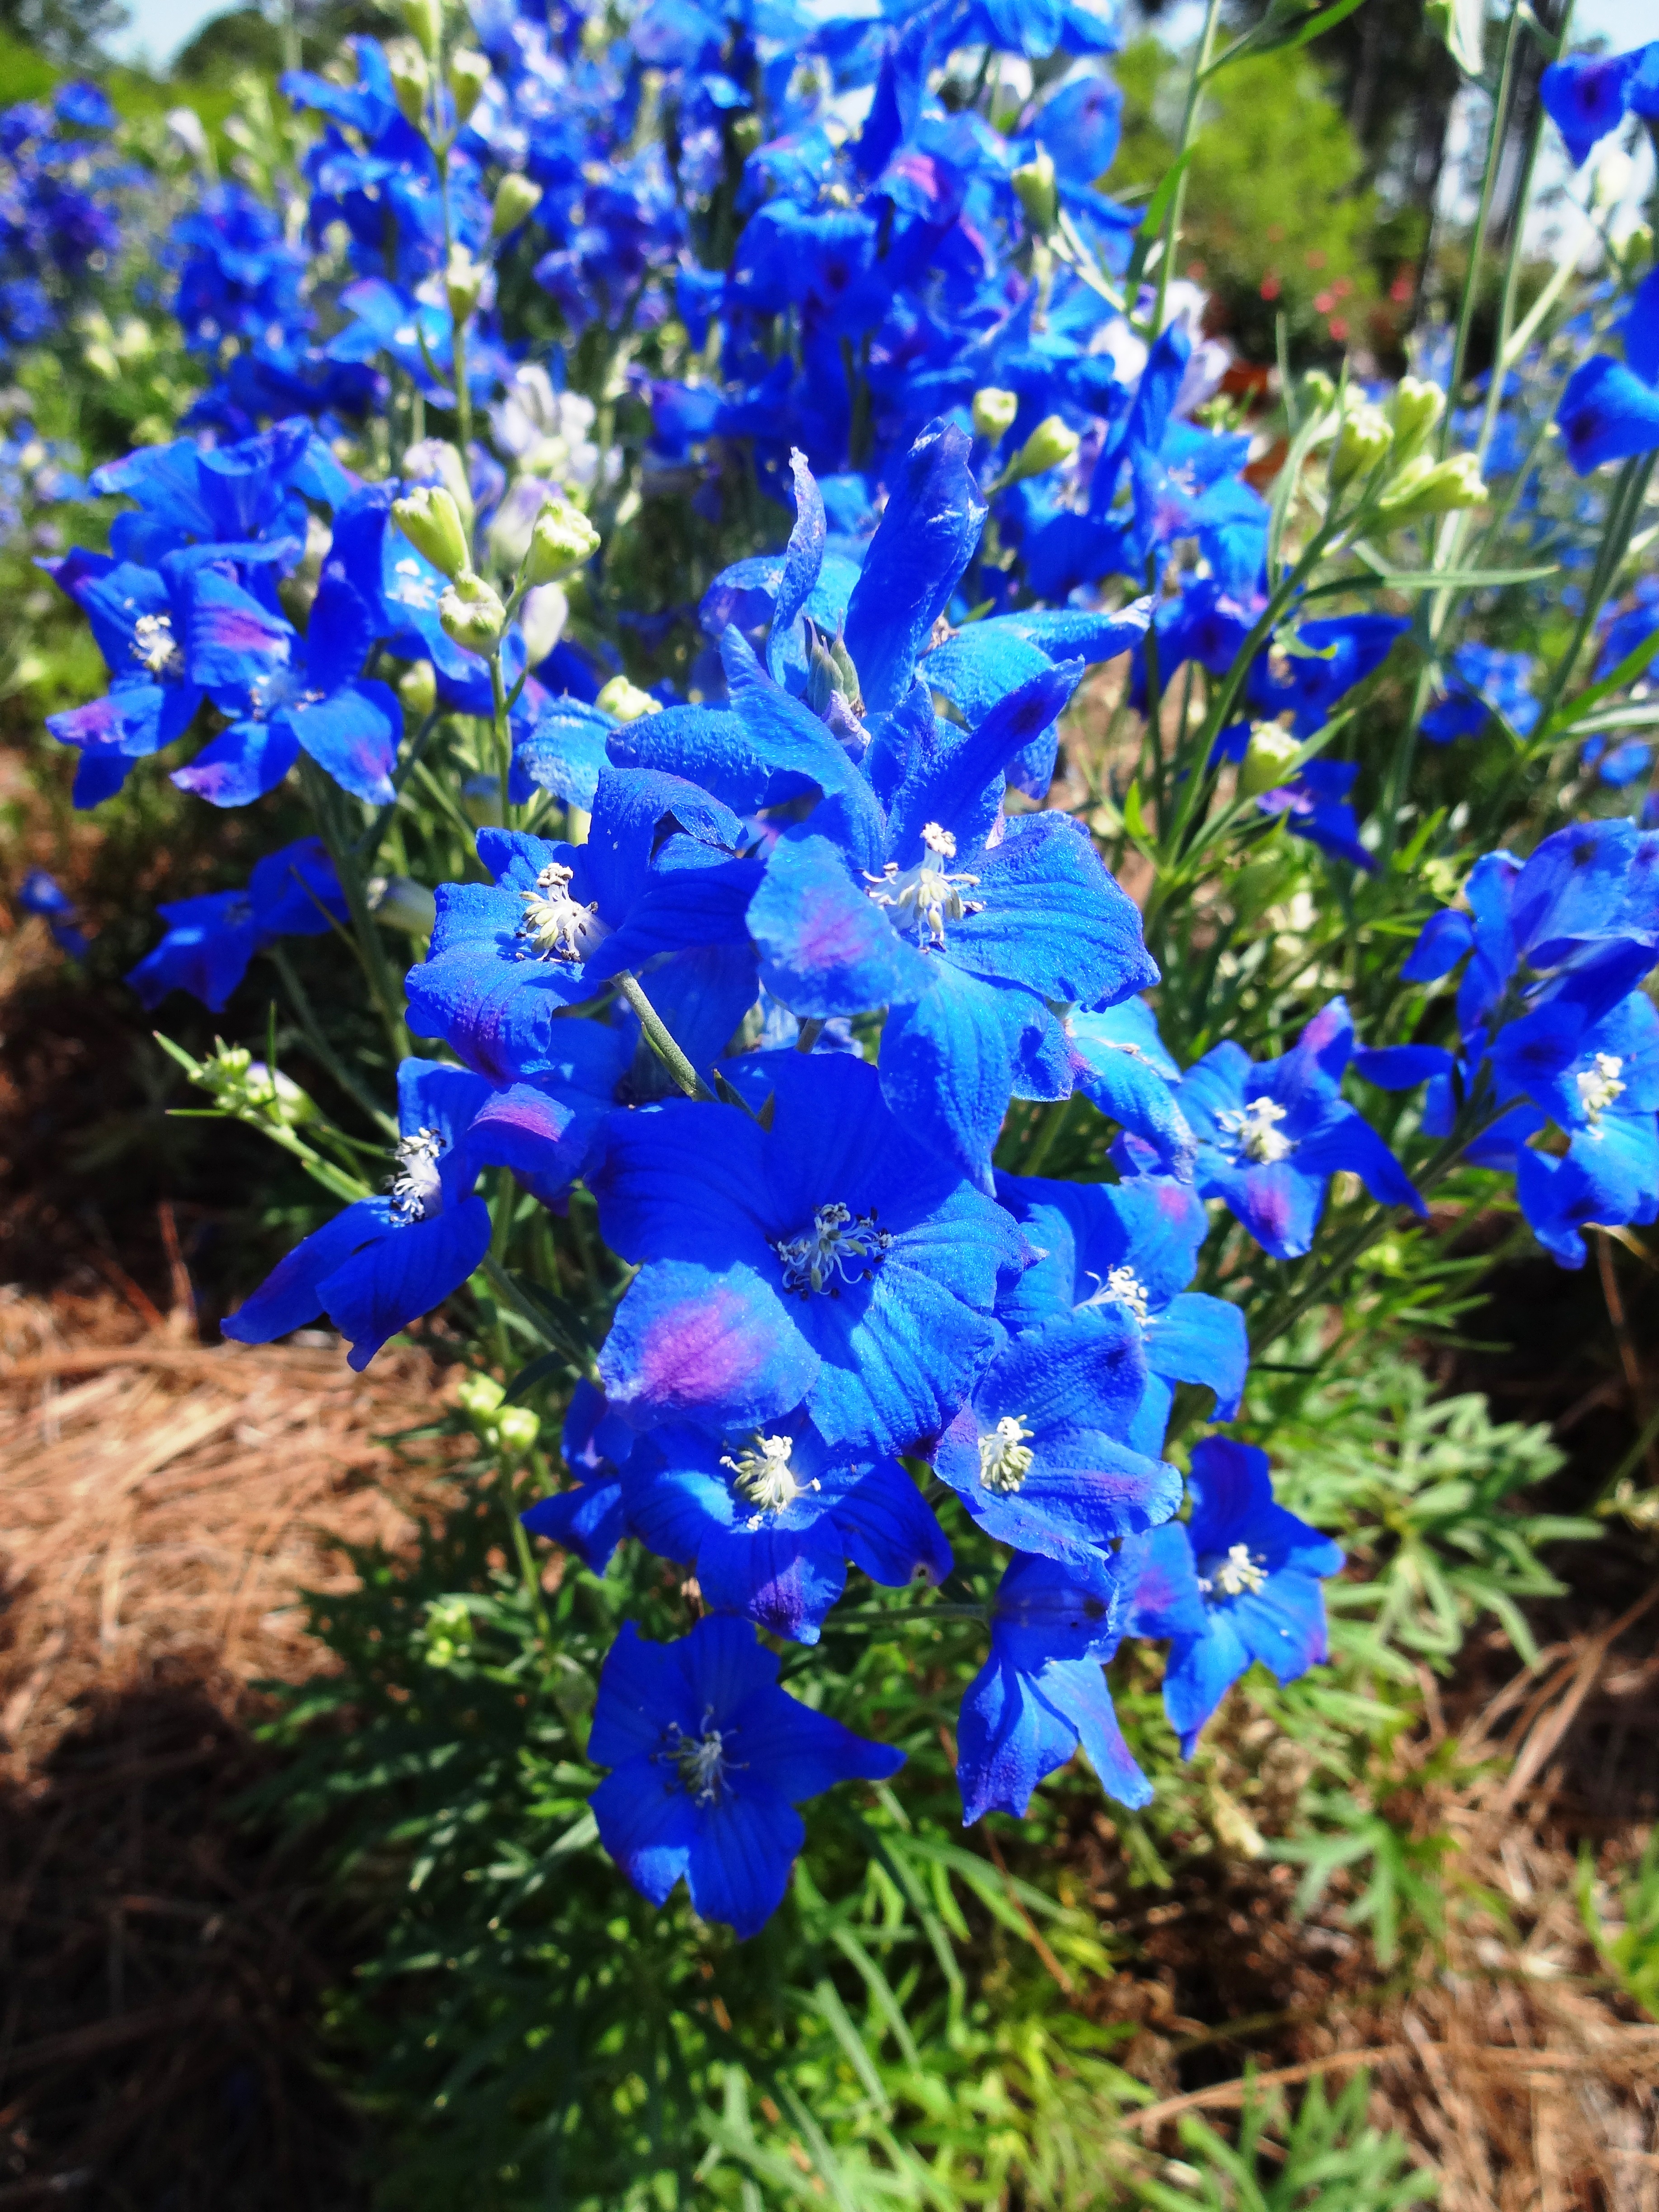 Try this truly blue flower in your landscape - LSU AgCenter